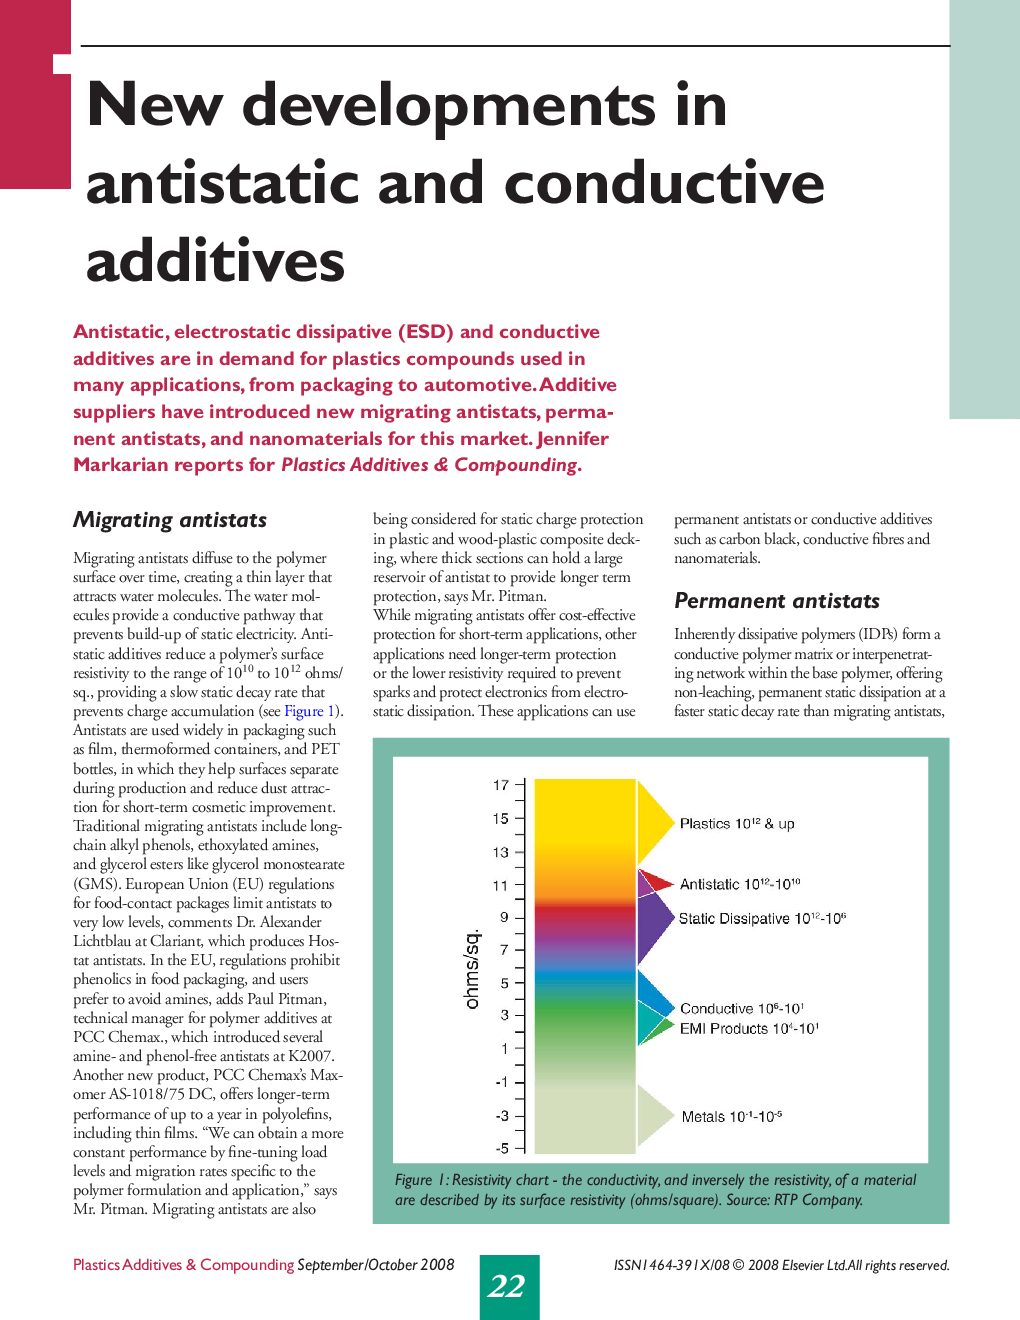 New developments in antistatic and conductive additives